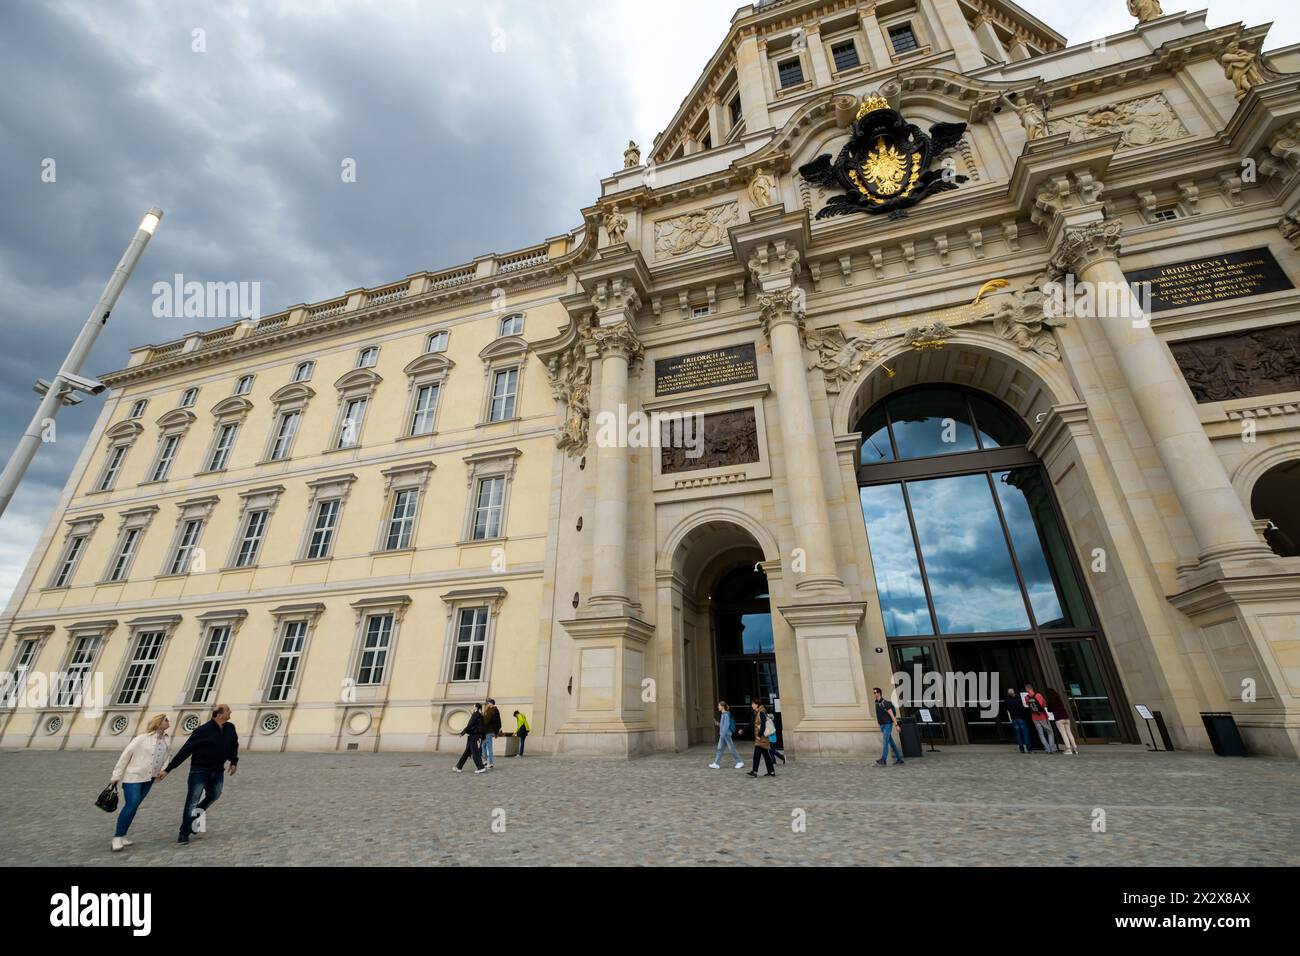 19.05.2023, Berlin, Berlin, Germany - Humboldt Forum in Berln-Mitte with the newly built baroque faÁade and the main entrance. 00A230519D109CAROEX.JPG Stock Photo